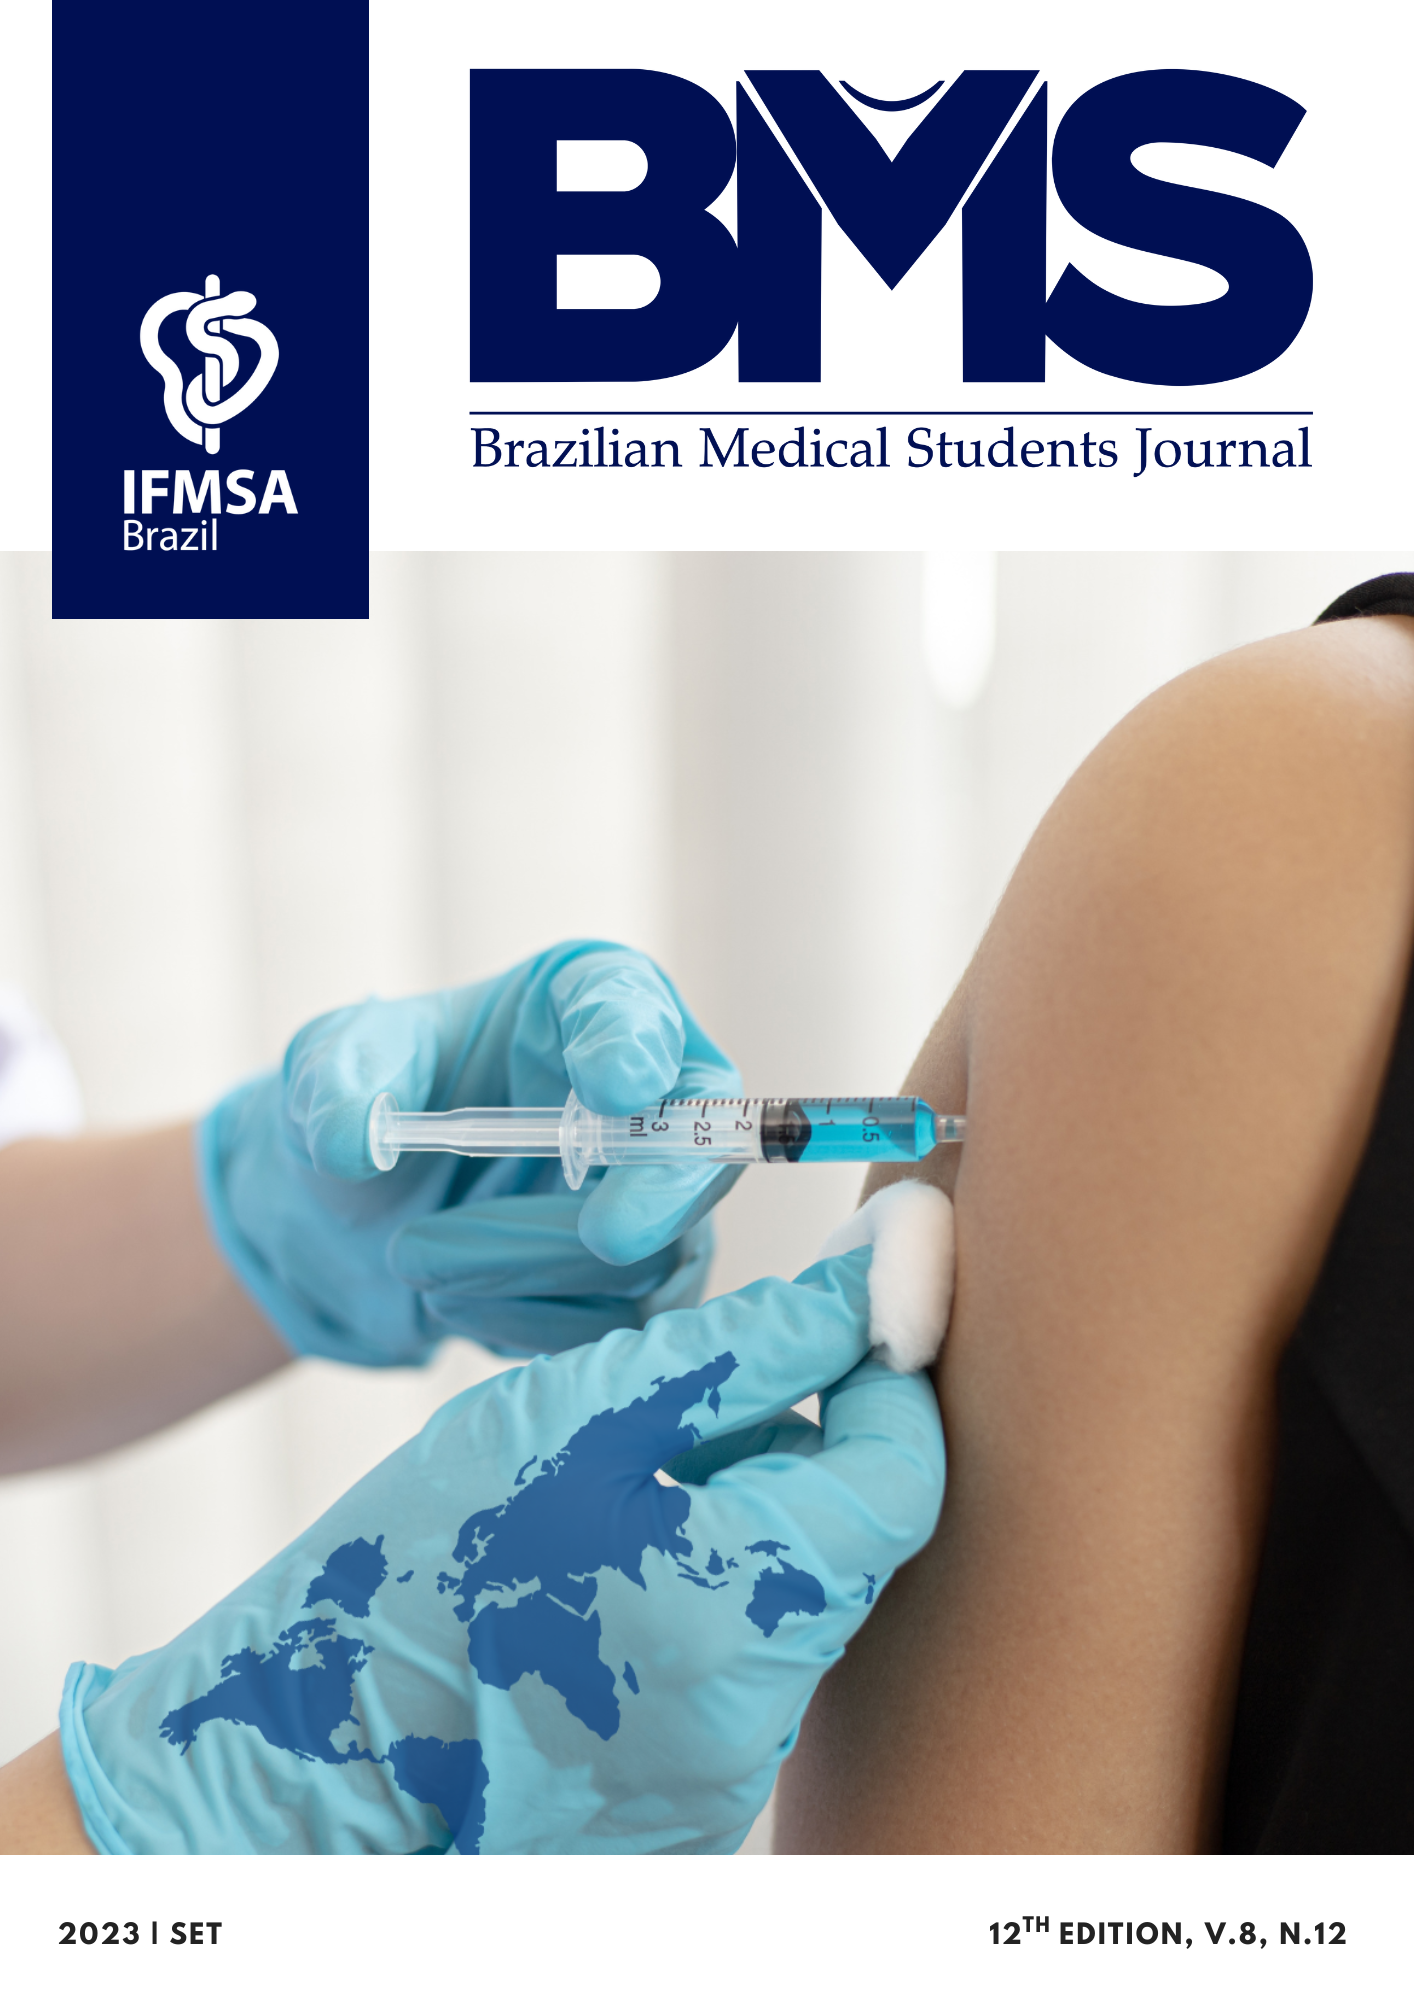 					View Vol. 8 No. 12 (2023): 12 edition of Brazilian Medical Students Journal
				